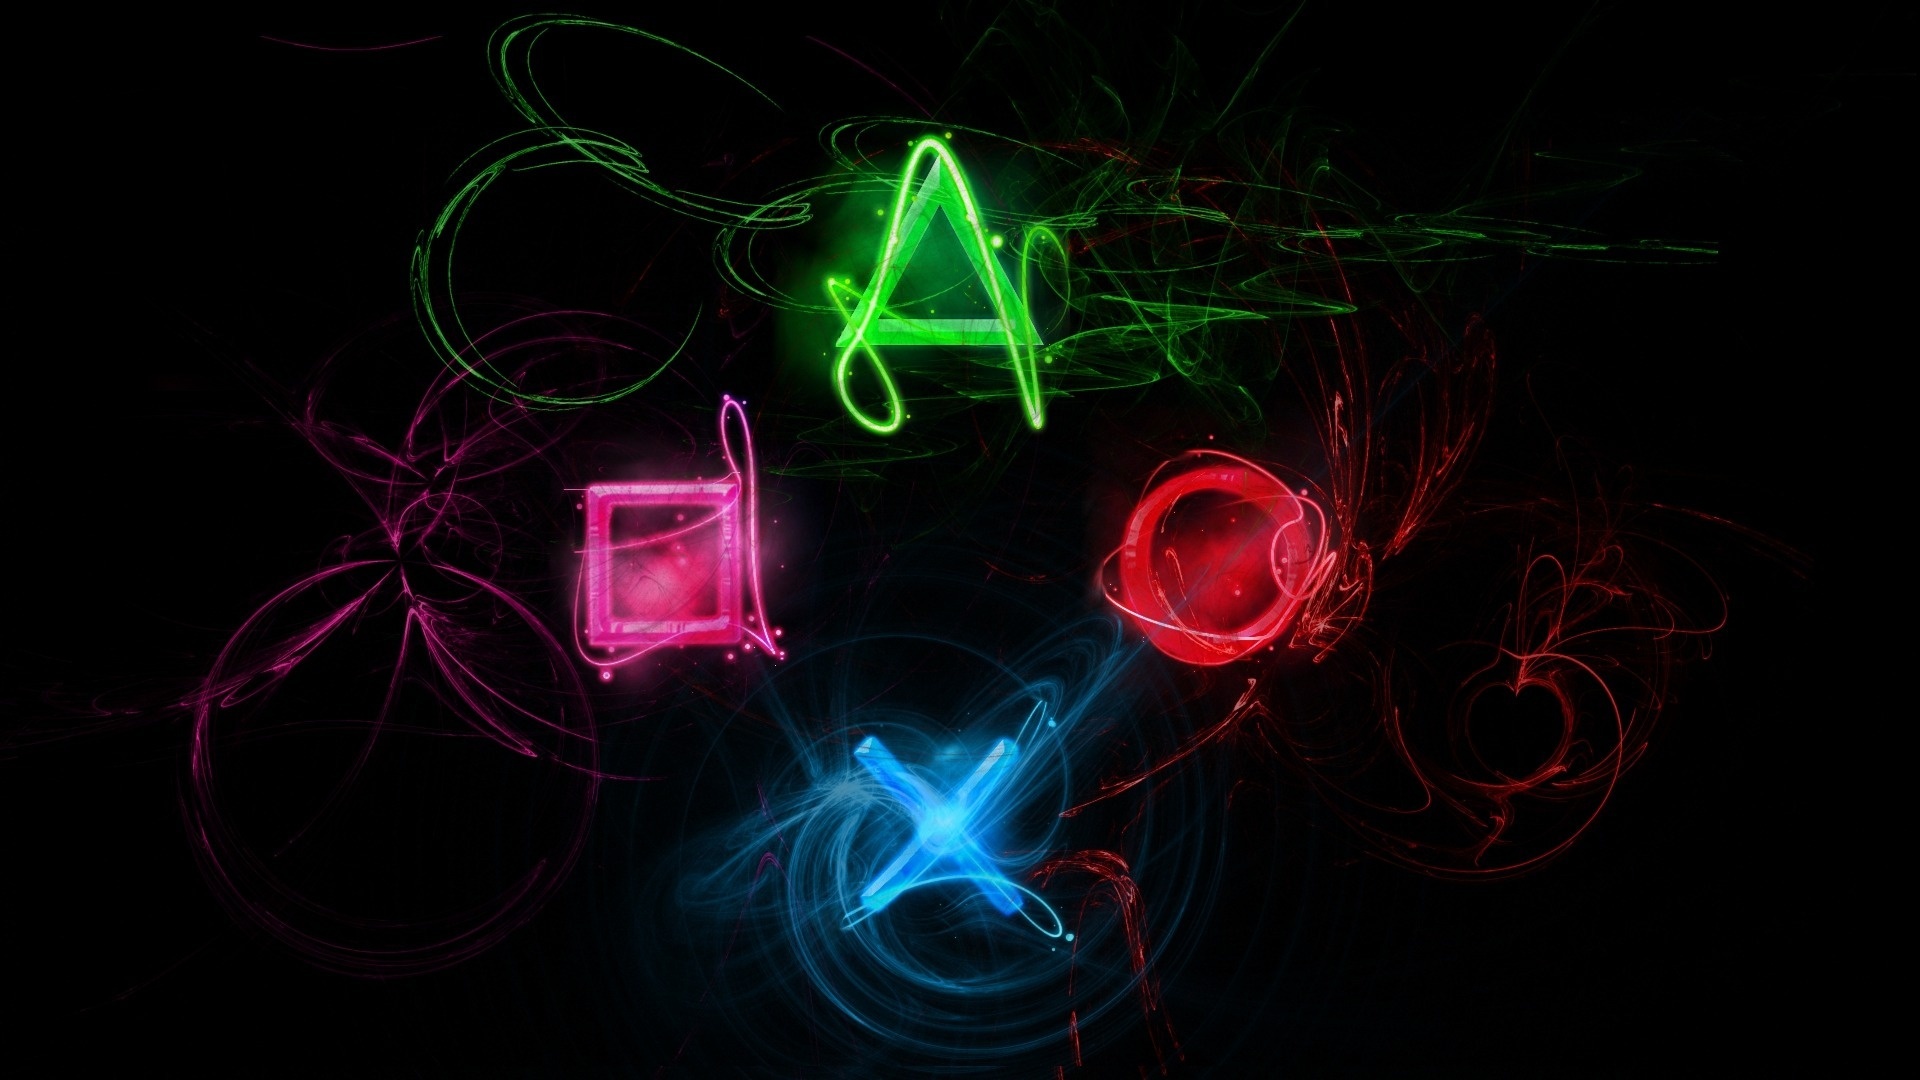 Ps3 Backgrounds | Wallpapers, Backgrounds, Images, Art Photos.